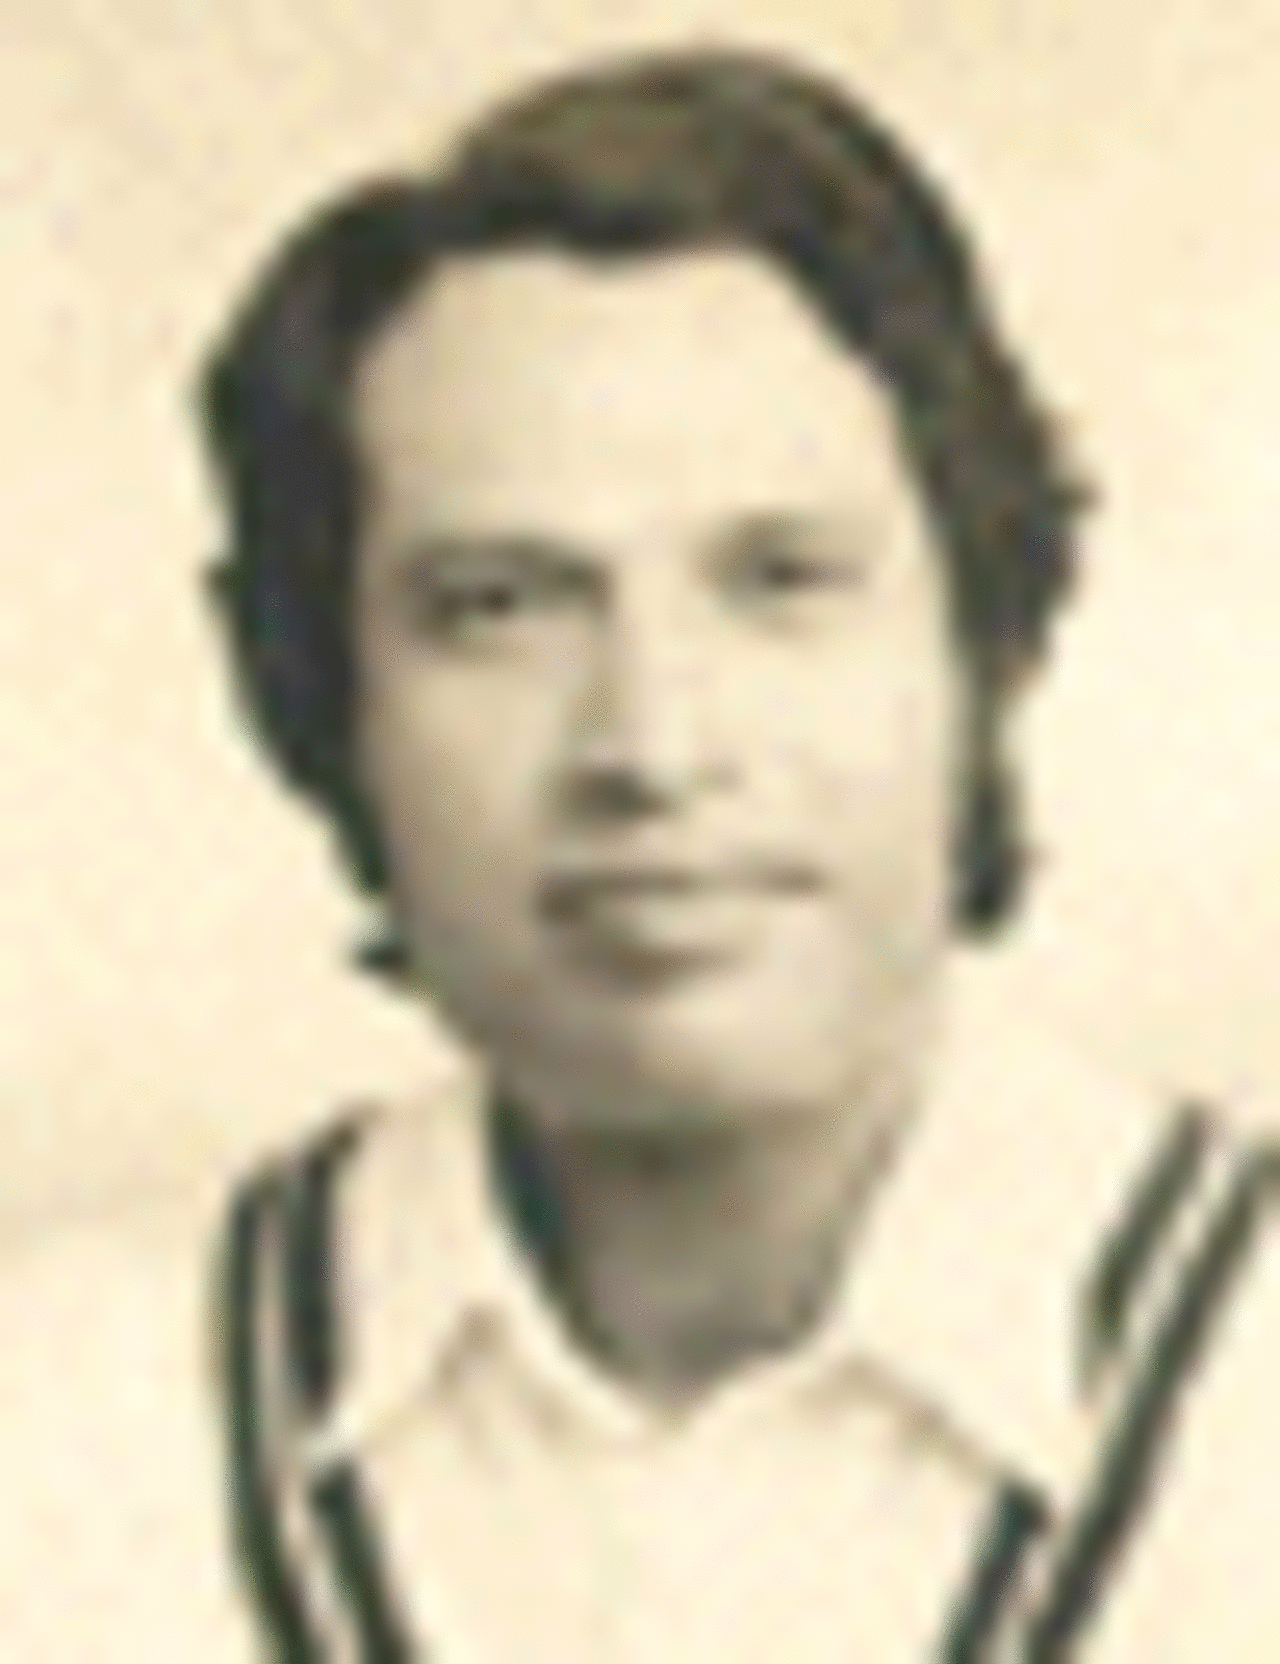 One of Pakistans prolific batsmen who played his debut match against the West Indies in 1957-58. Also captained Pakistan.